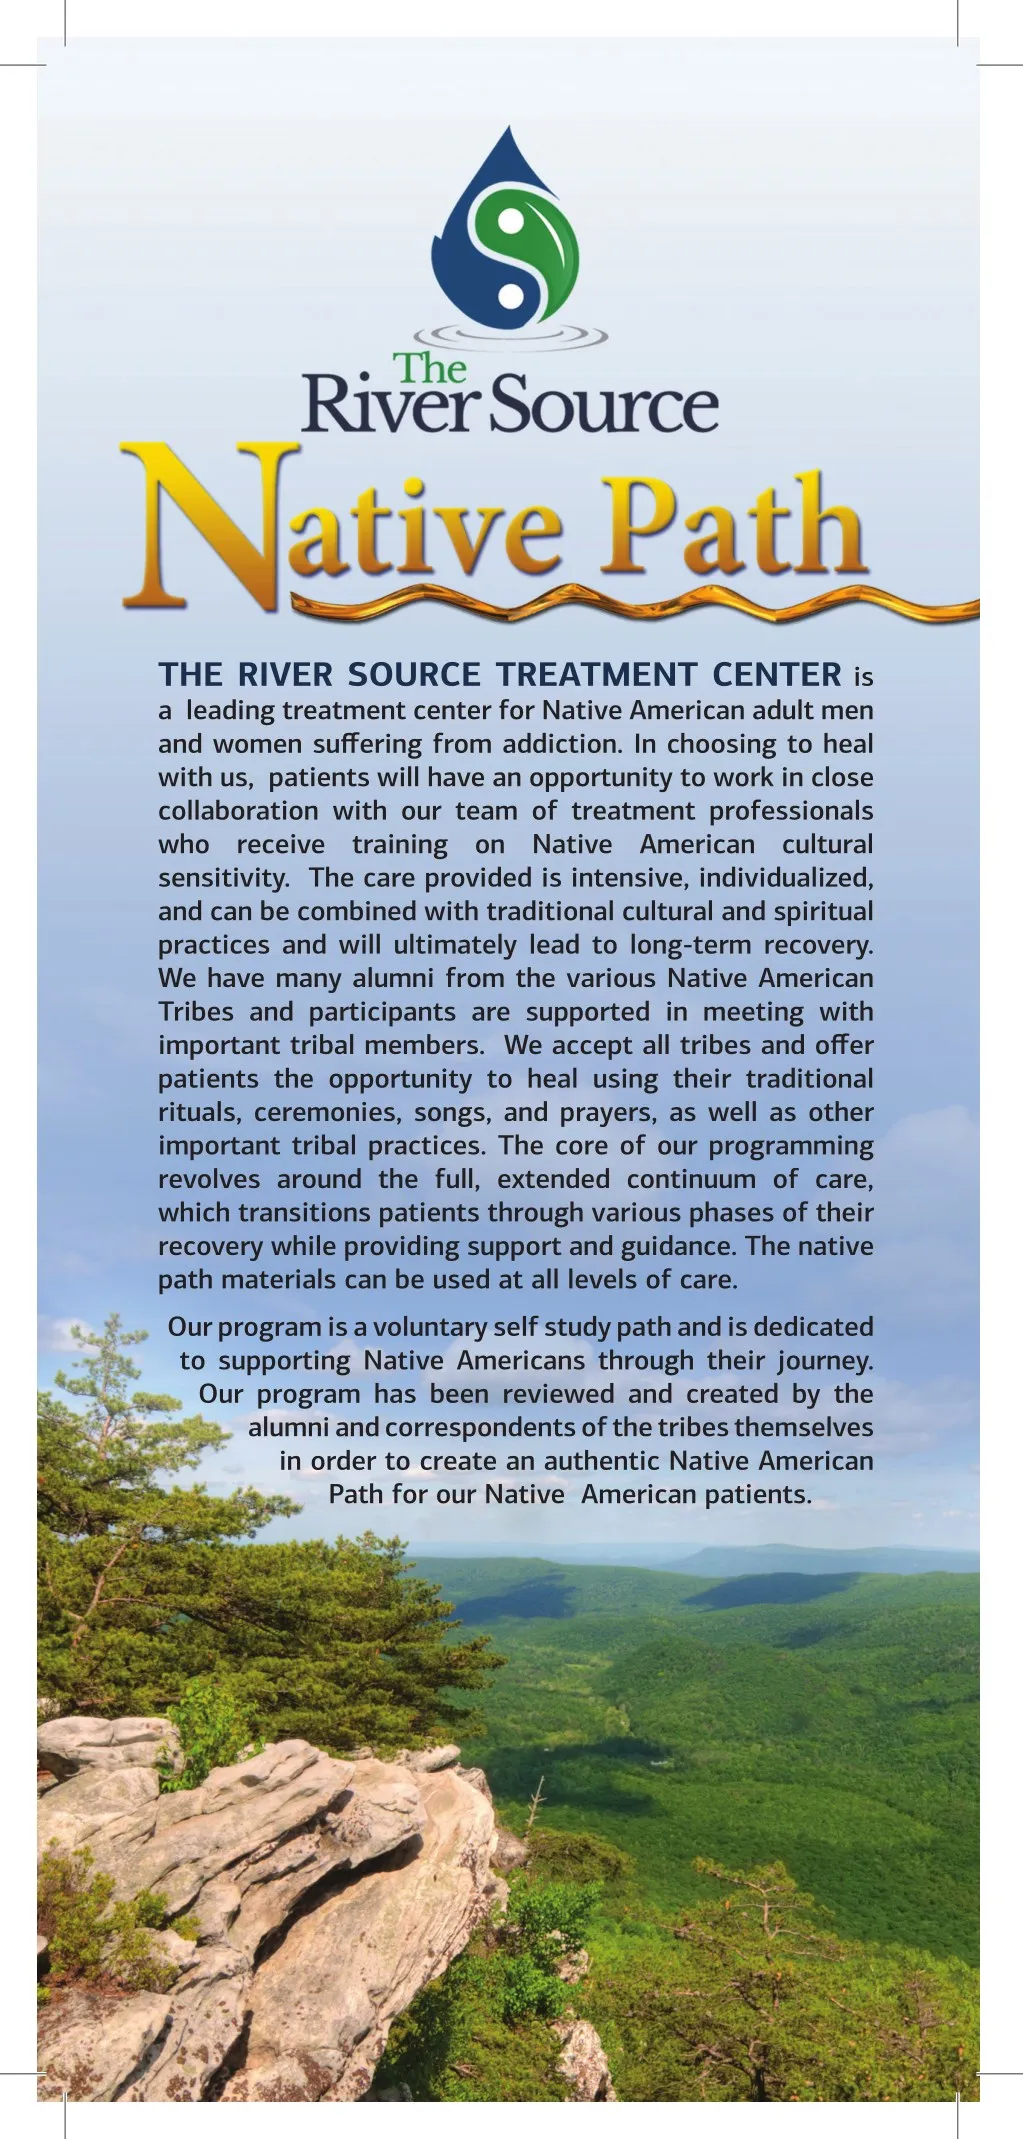 the river source treatment center is a leading